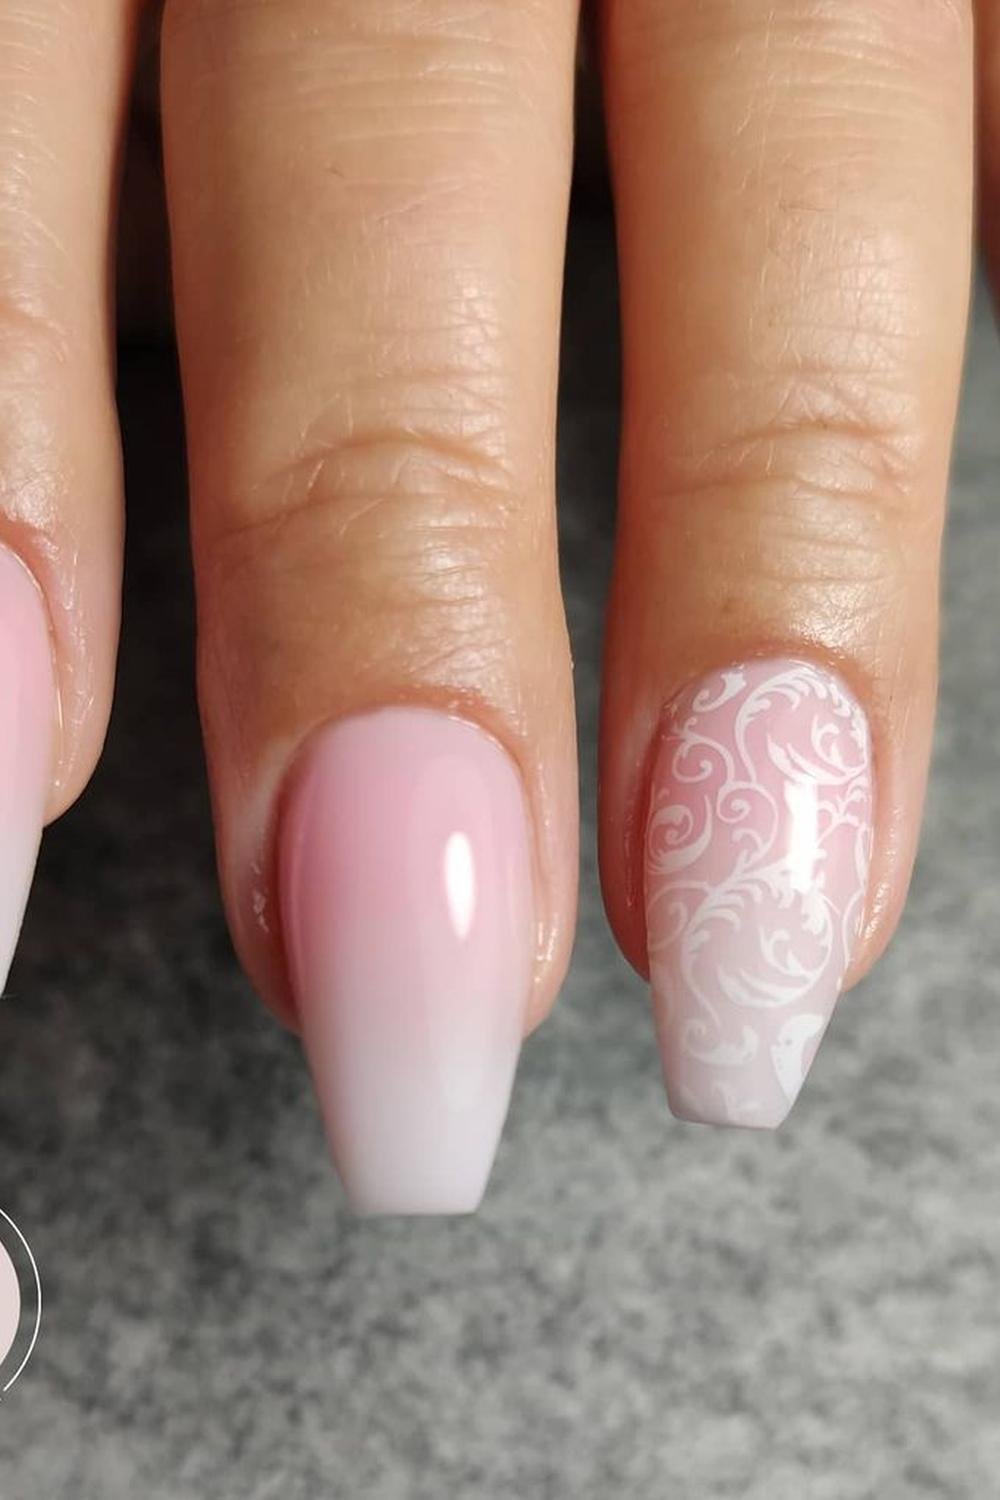 35 - Picture of Ballerina Nails